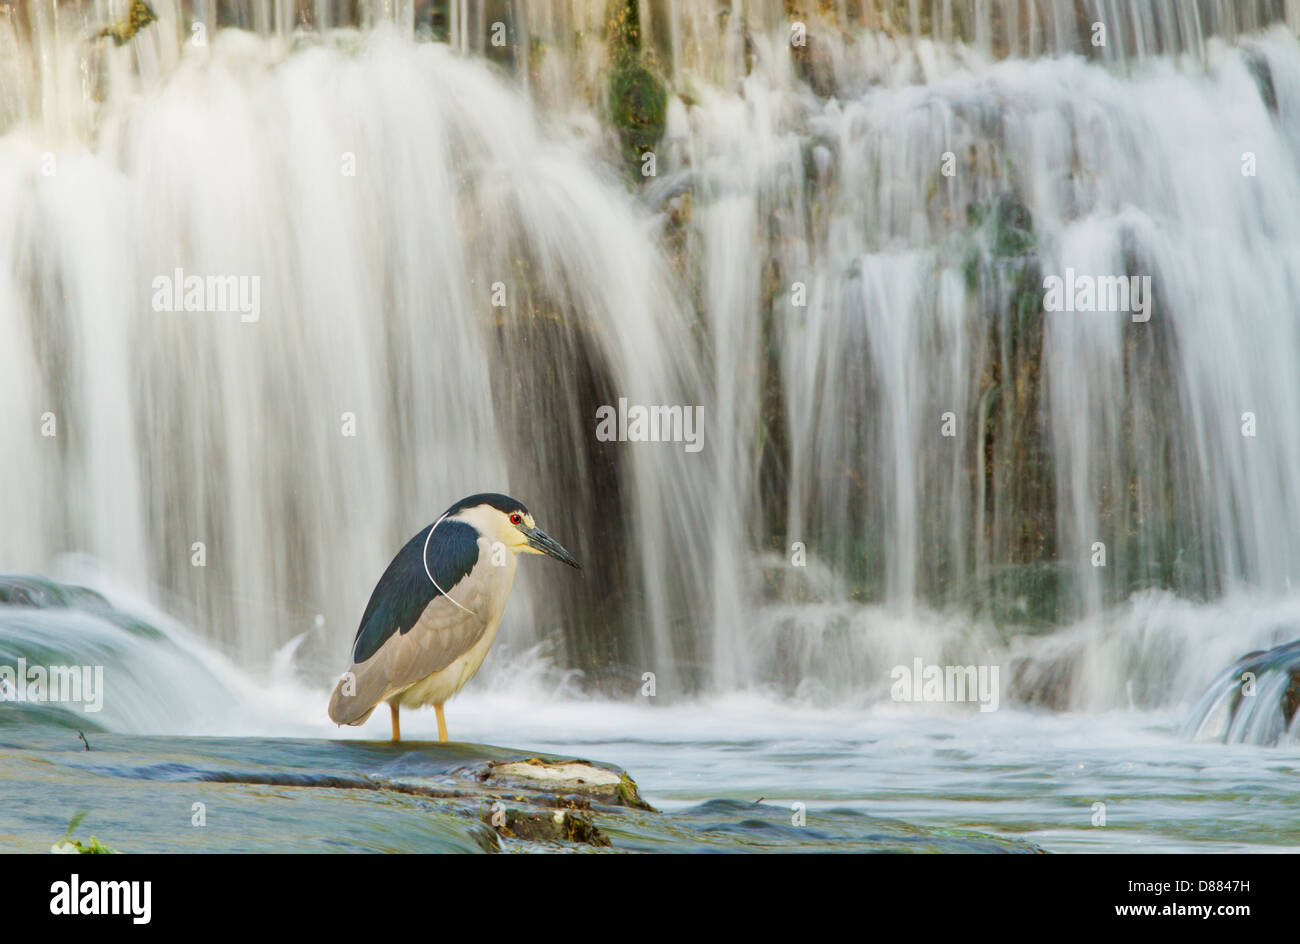 Black-crowned night-heron (Nycticorax nycticorax). This is spectacular long exposure image with the silky cascade in background Stock Photo